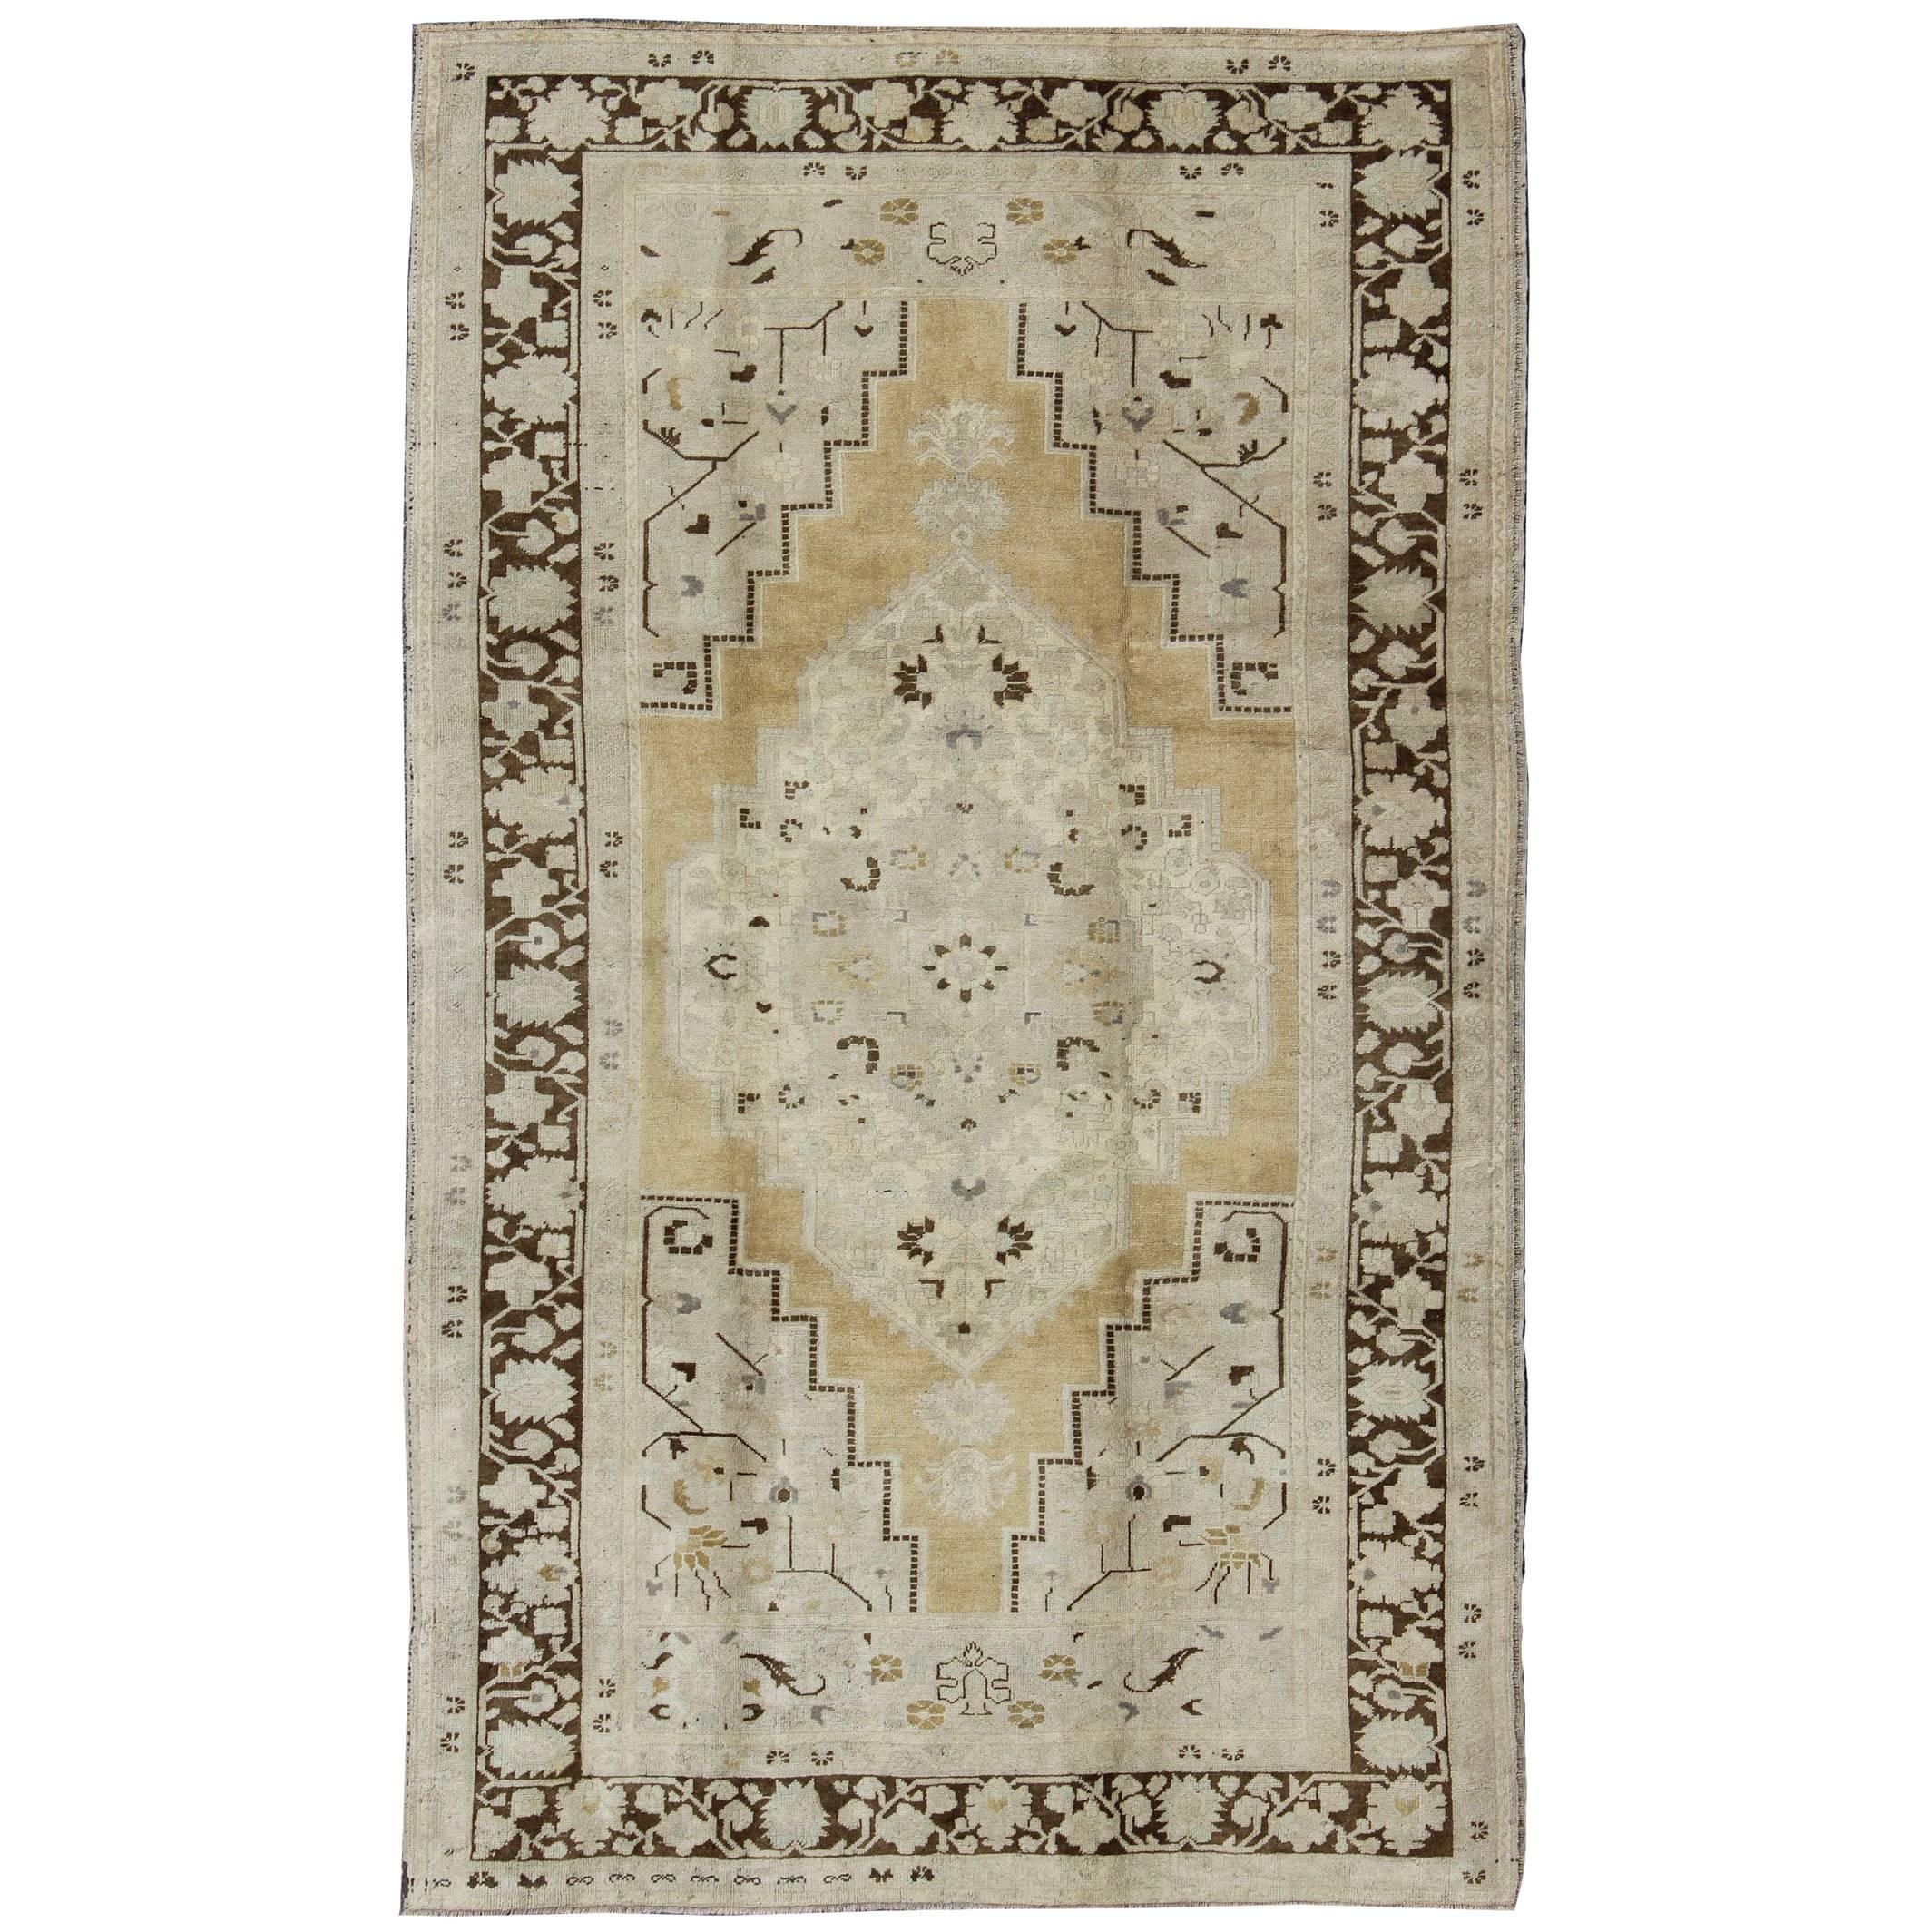 Turkish Oushak Rug in Pale Yellow, Taupe and Brown Border